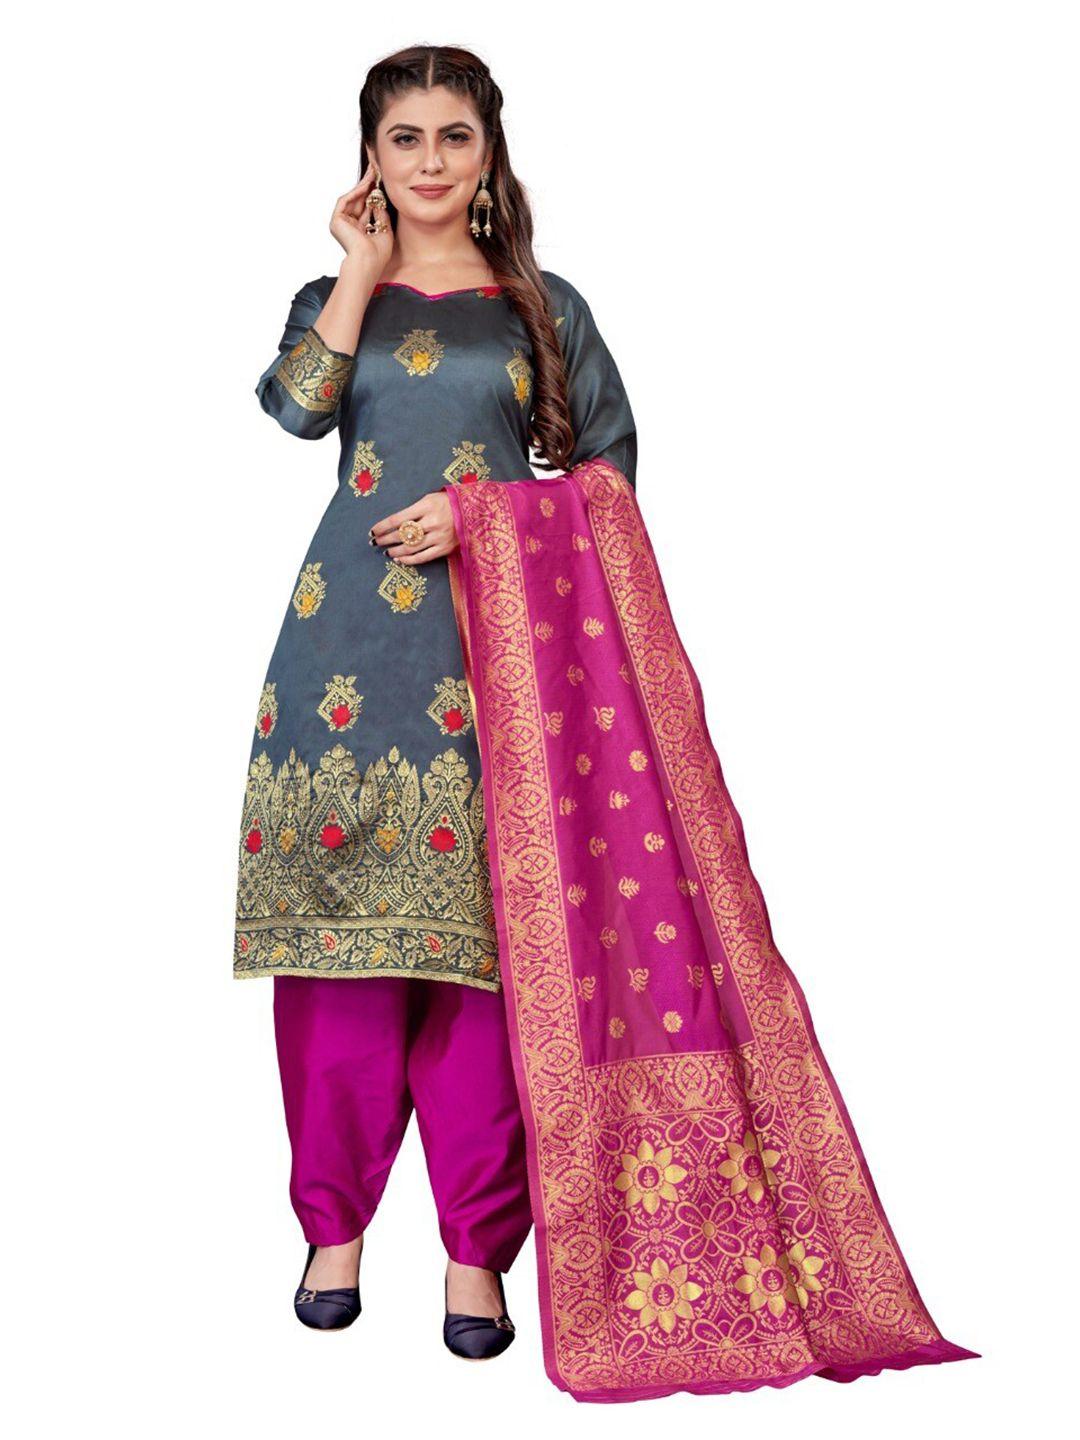 morly women grey & pink dupion silk unstitched dress material